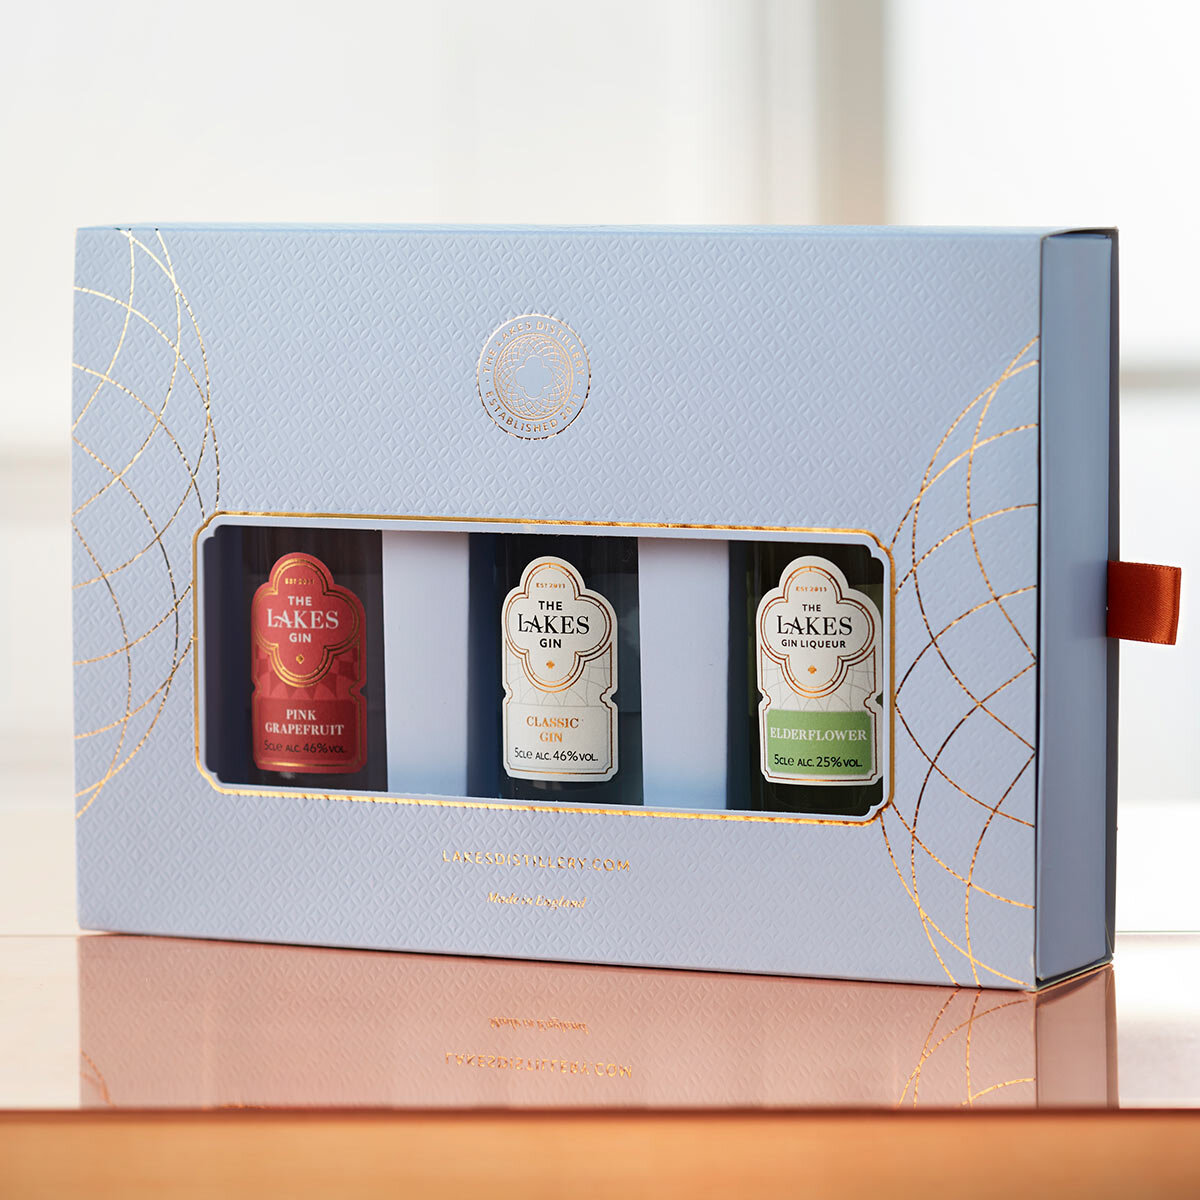 Giftpack of 3 gins in blue cardboard box set on table